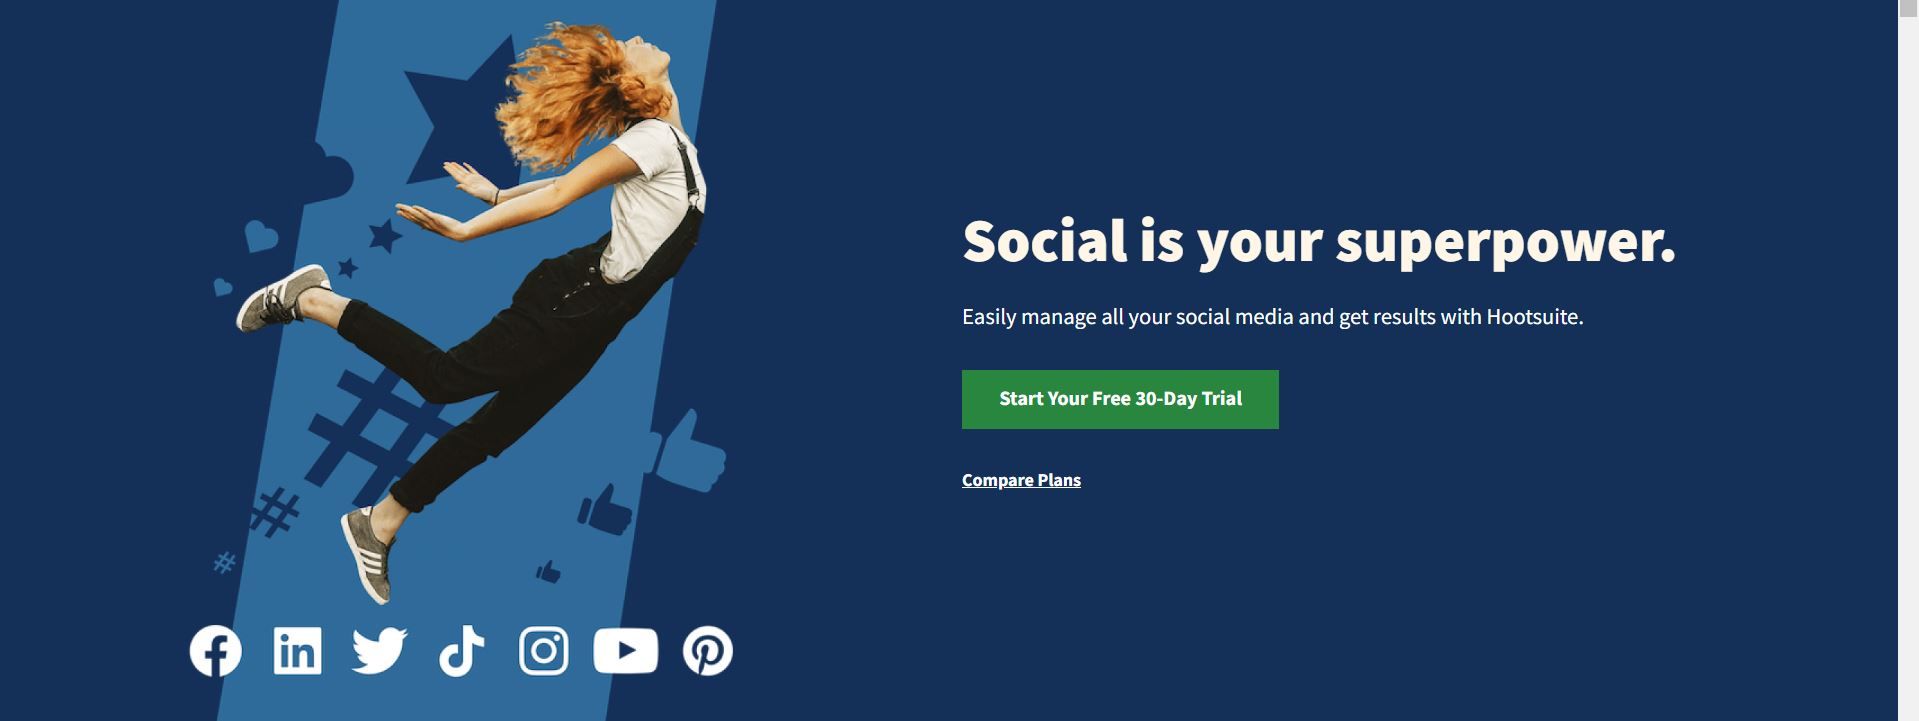  Hootsuite offers scheduling and management services for social media accounts